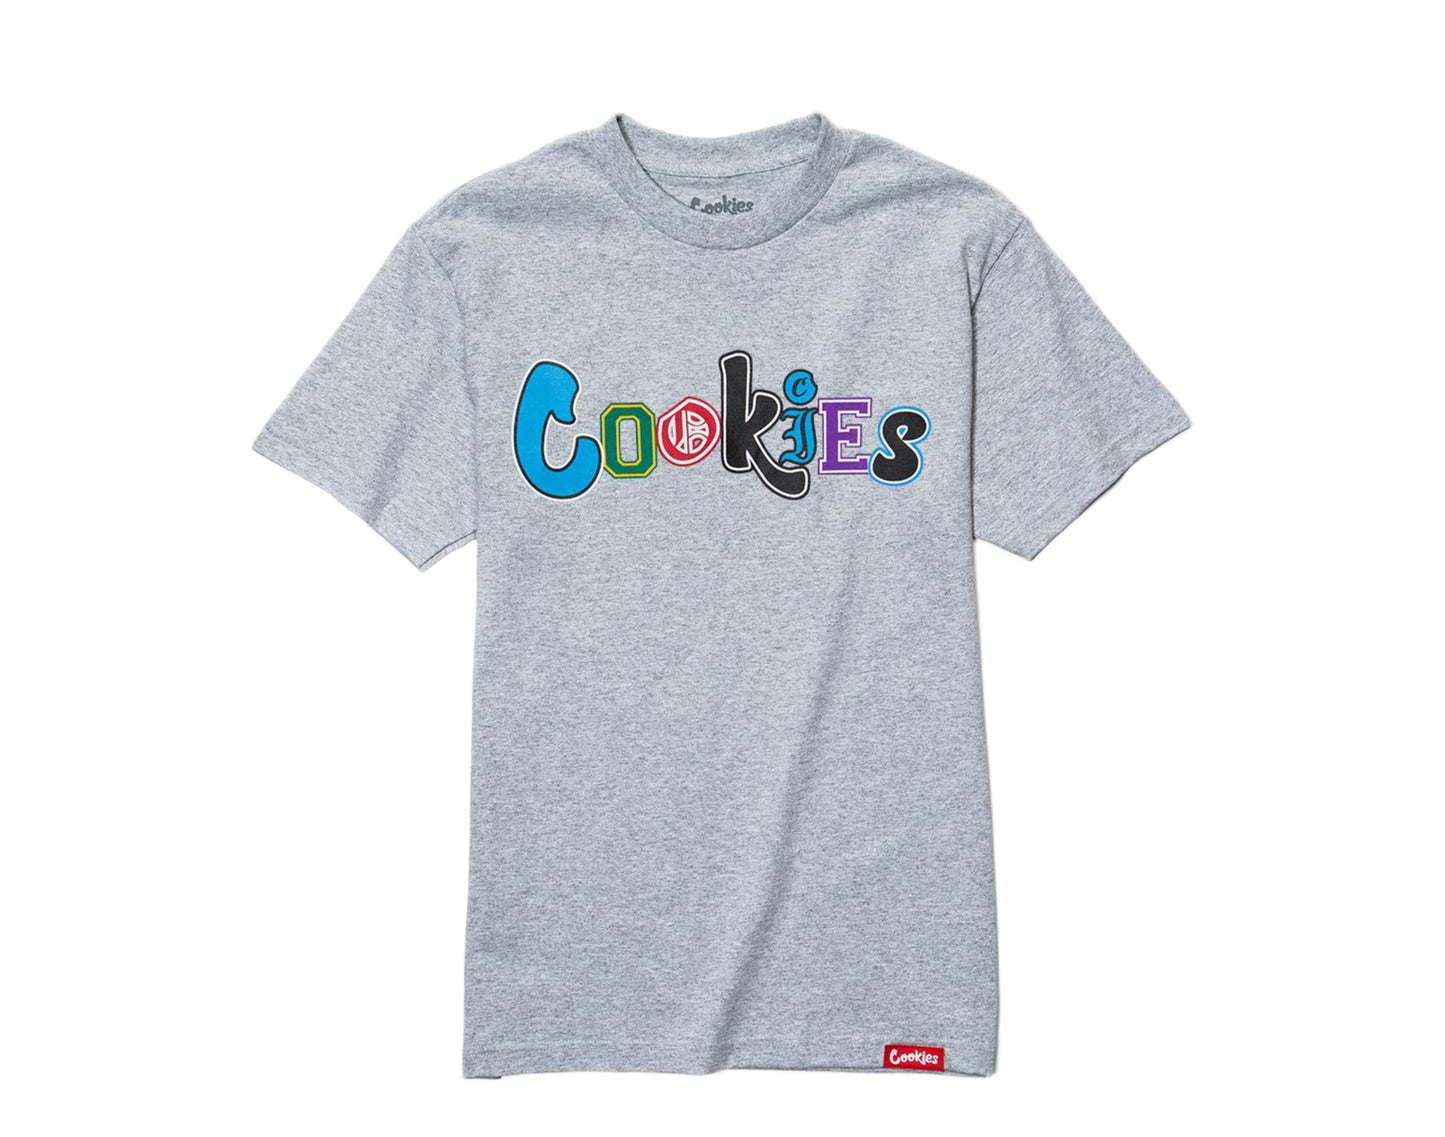 Cookies City Limits Multi Color Printed Logo Grey Tee Shirt 1545T4116-HGY